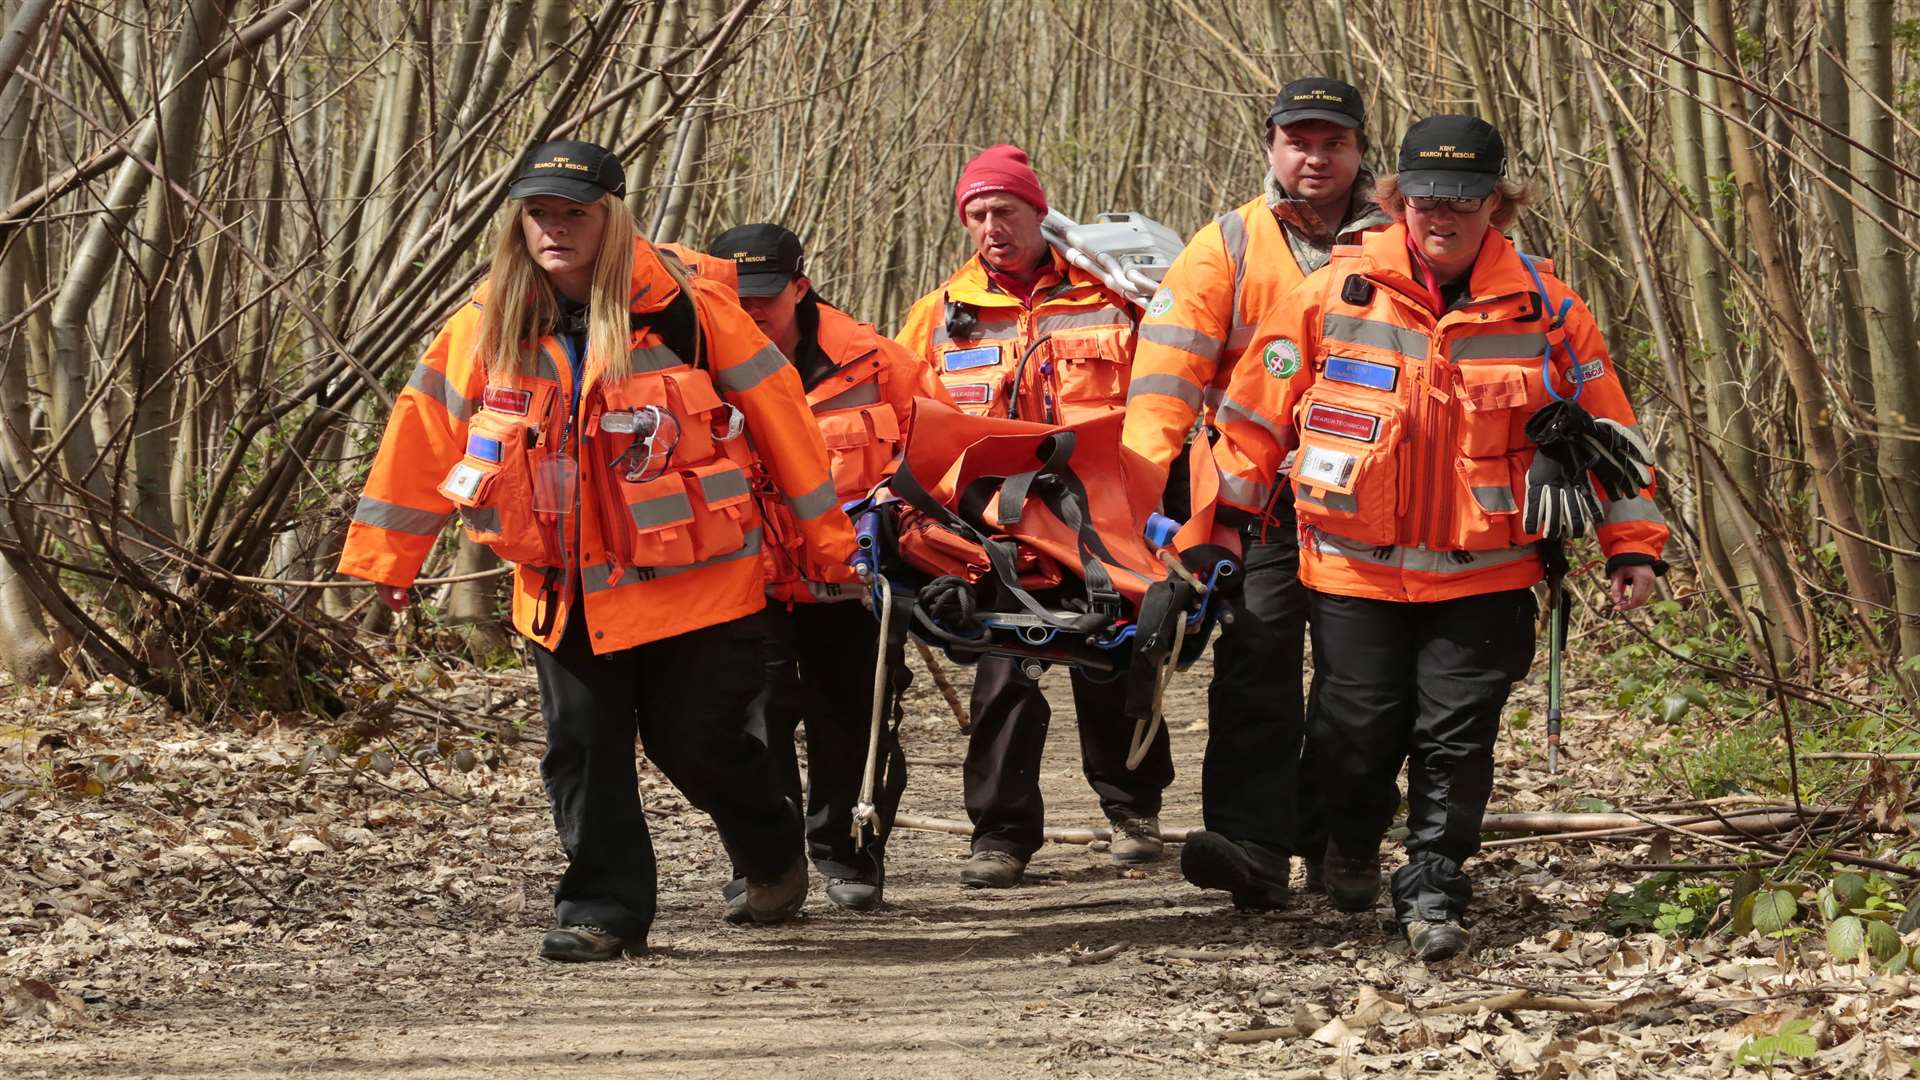 They use a stretcher to carry the youngster out of the woods. Picture by Martin Apps.